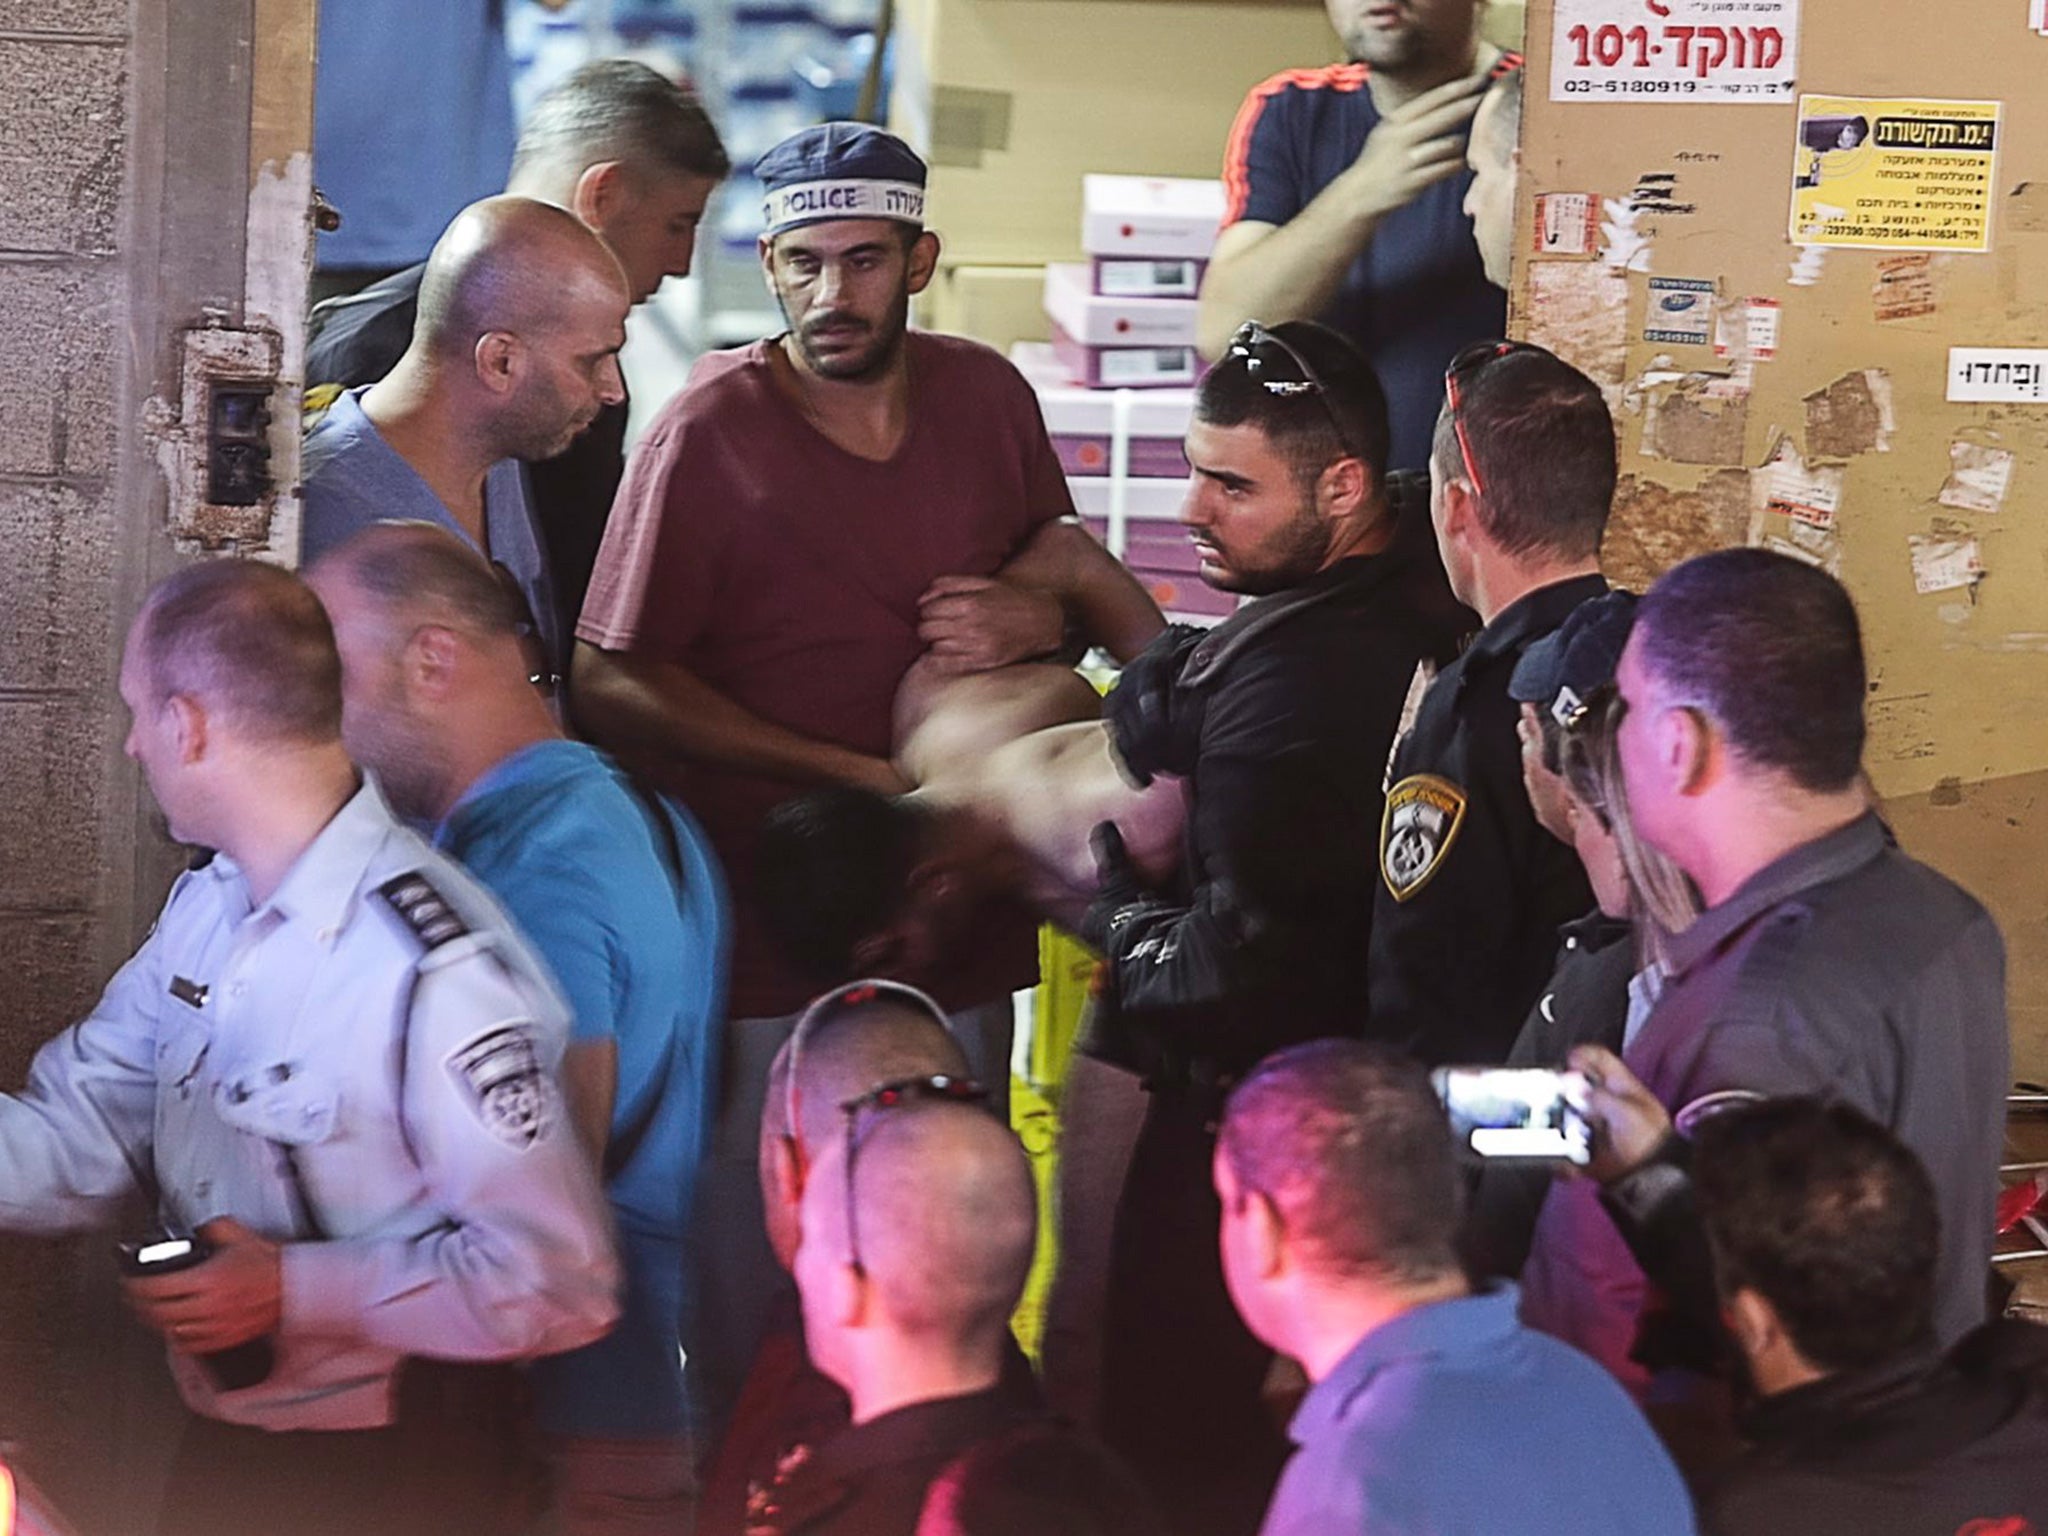 Israeli policemen arrest a Palestinian attacker at the scene of a stabbing attack in Tel Aviv, Israel. Two people were killed and a third injured by an assailant wielding a knife